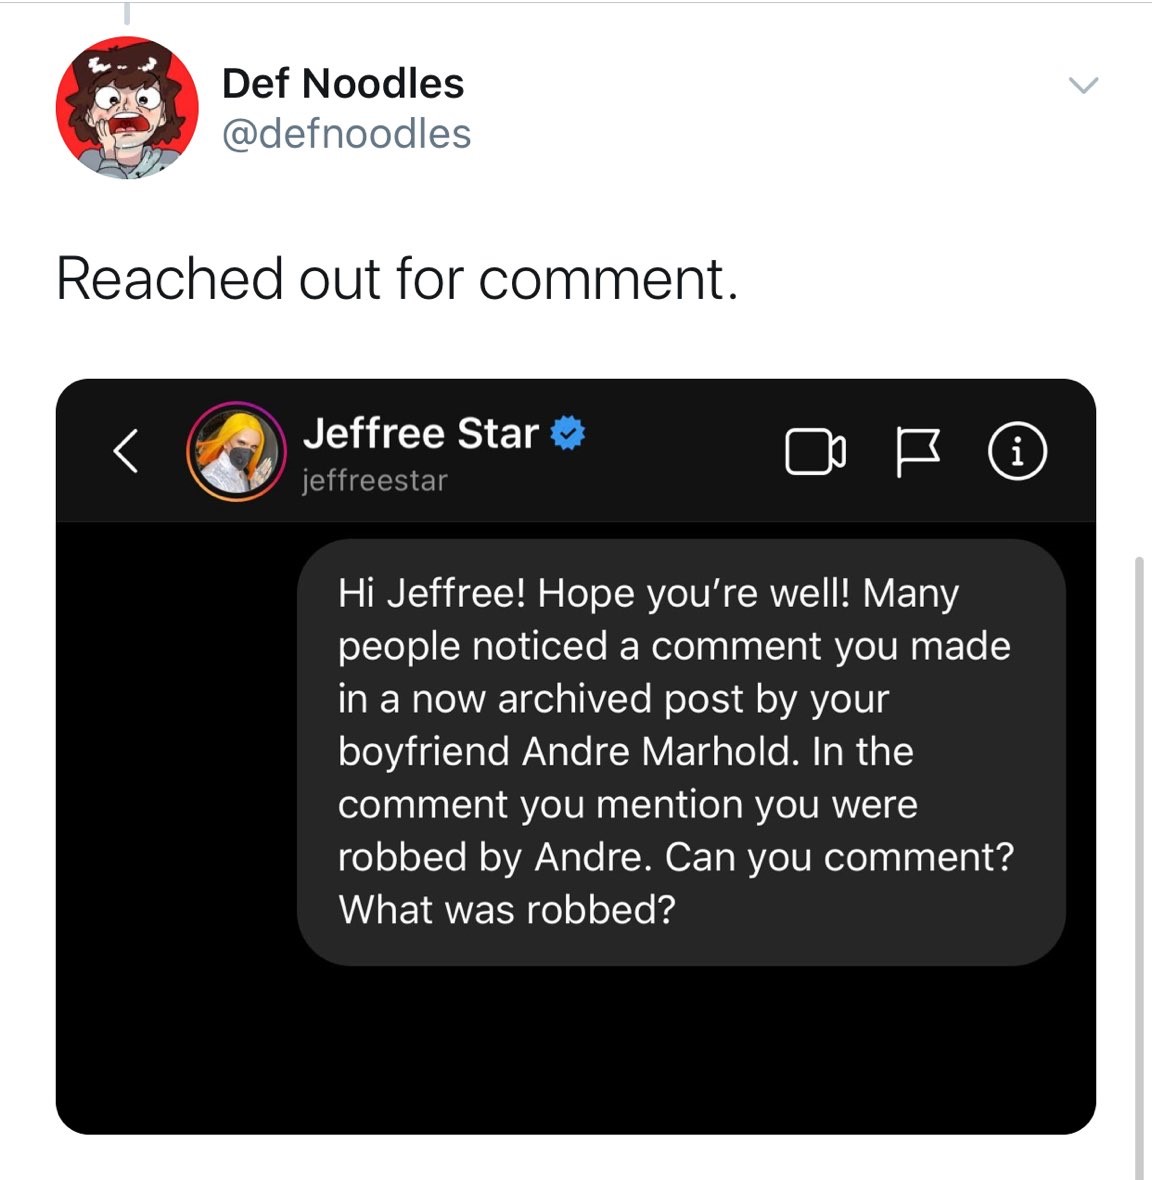 Def Noodles reached out to Jeffree Star